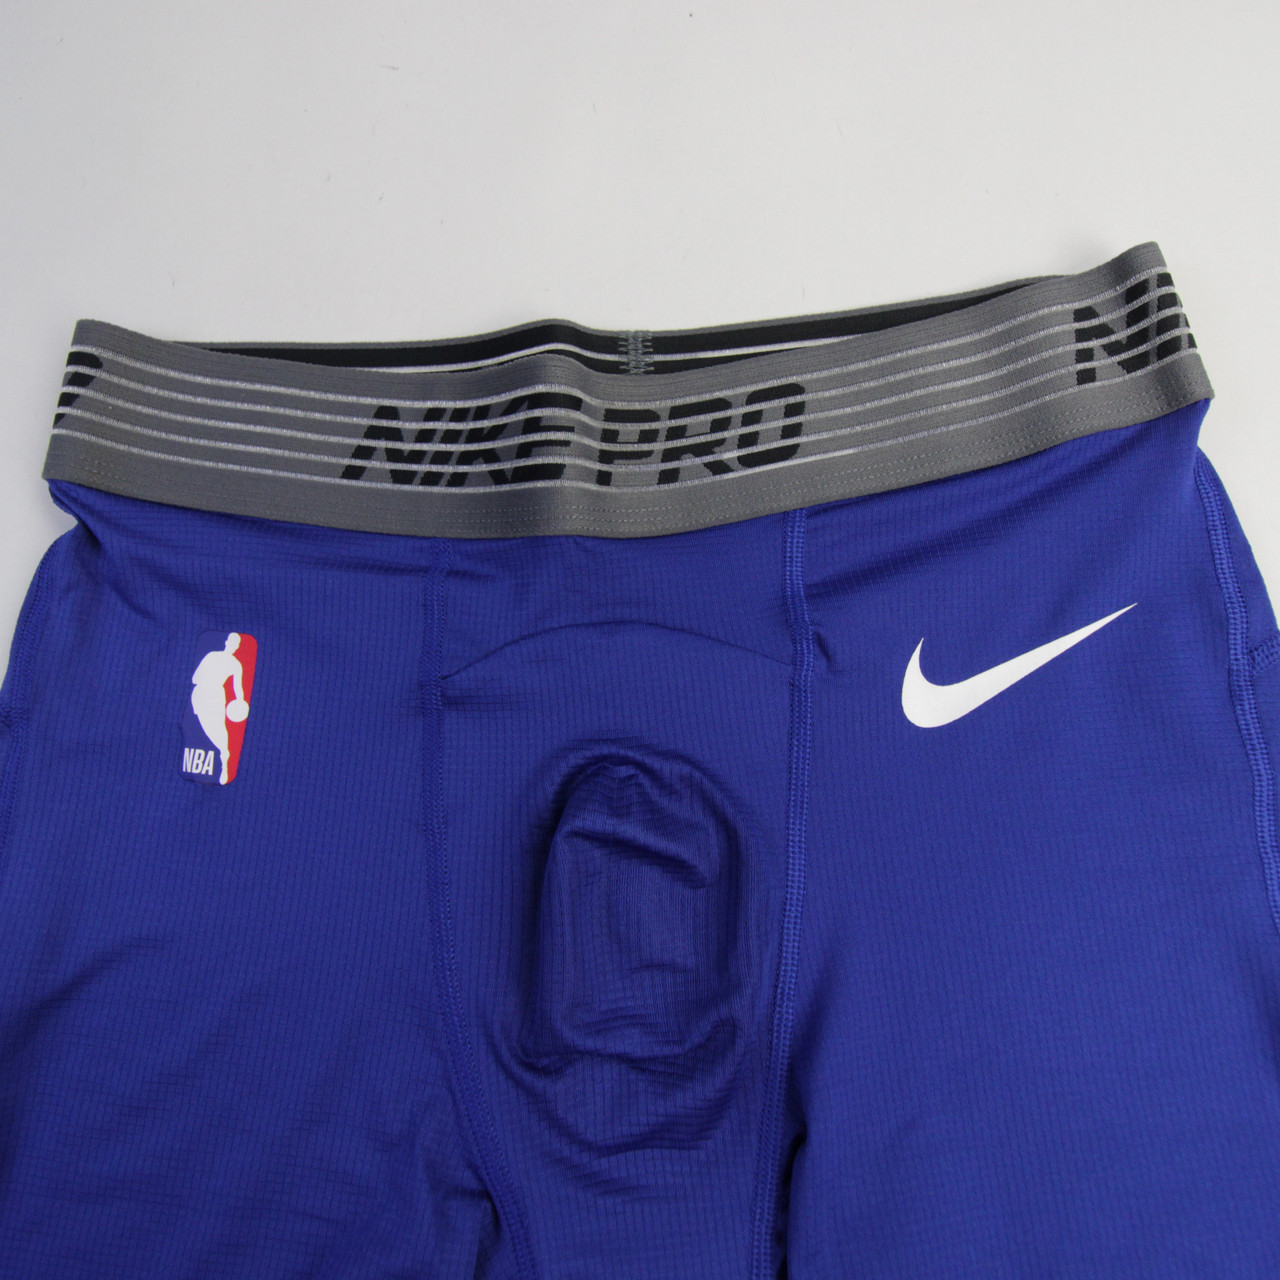 NIKE Men's NBA Issued NBA Basketball Compression Shorts 3XLT All